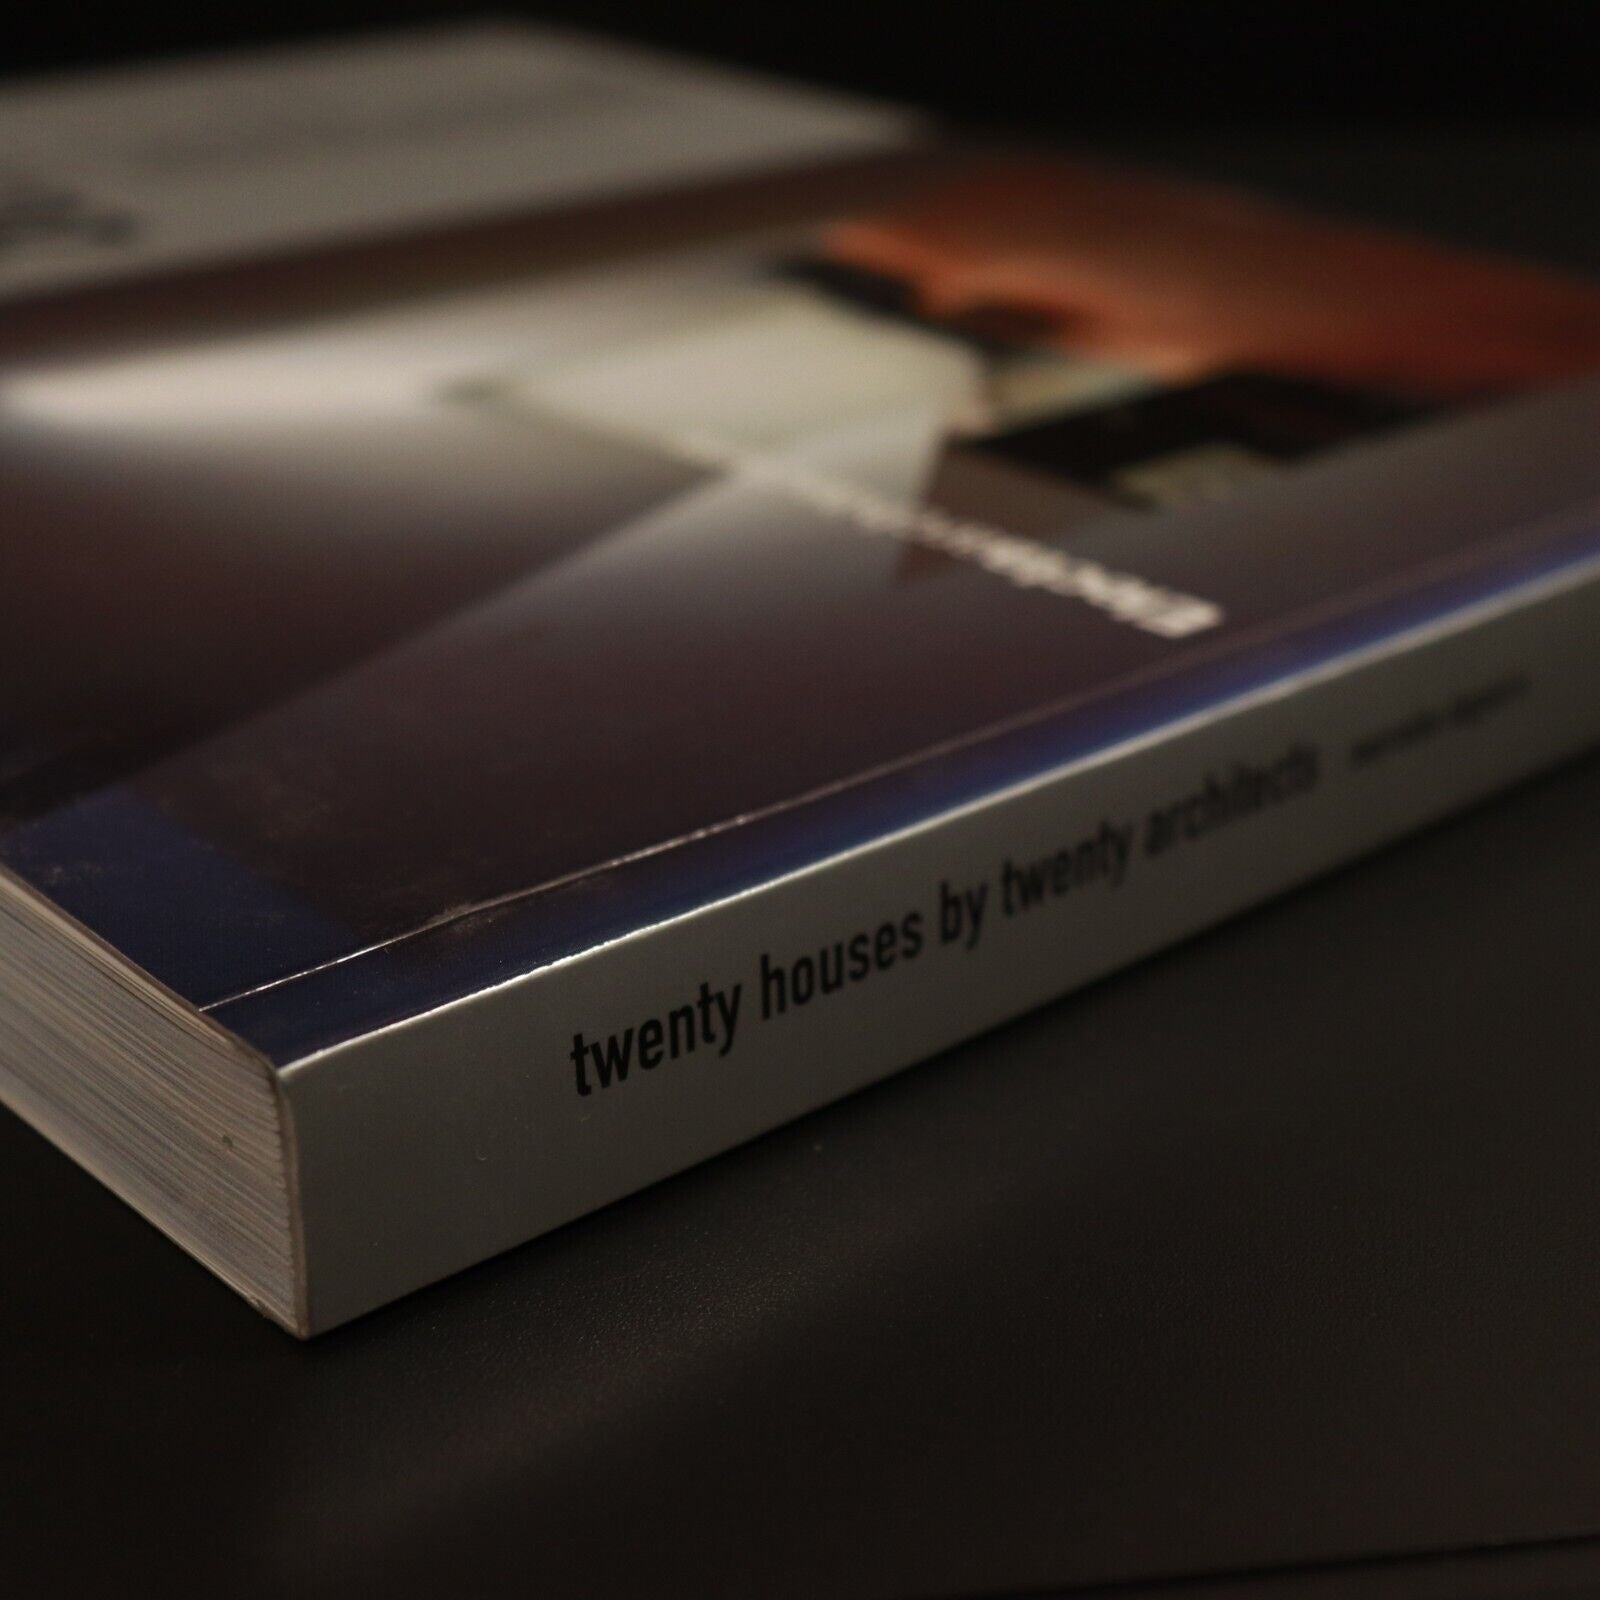 2006 20 Houses By Twenty Architects by Mercedes Daguerre Architecture Book